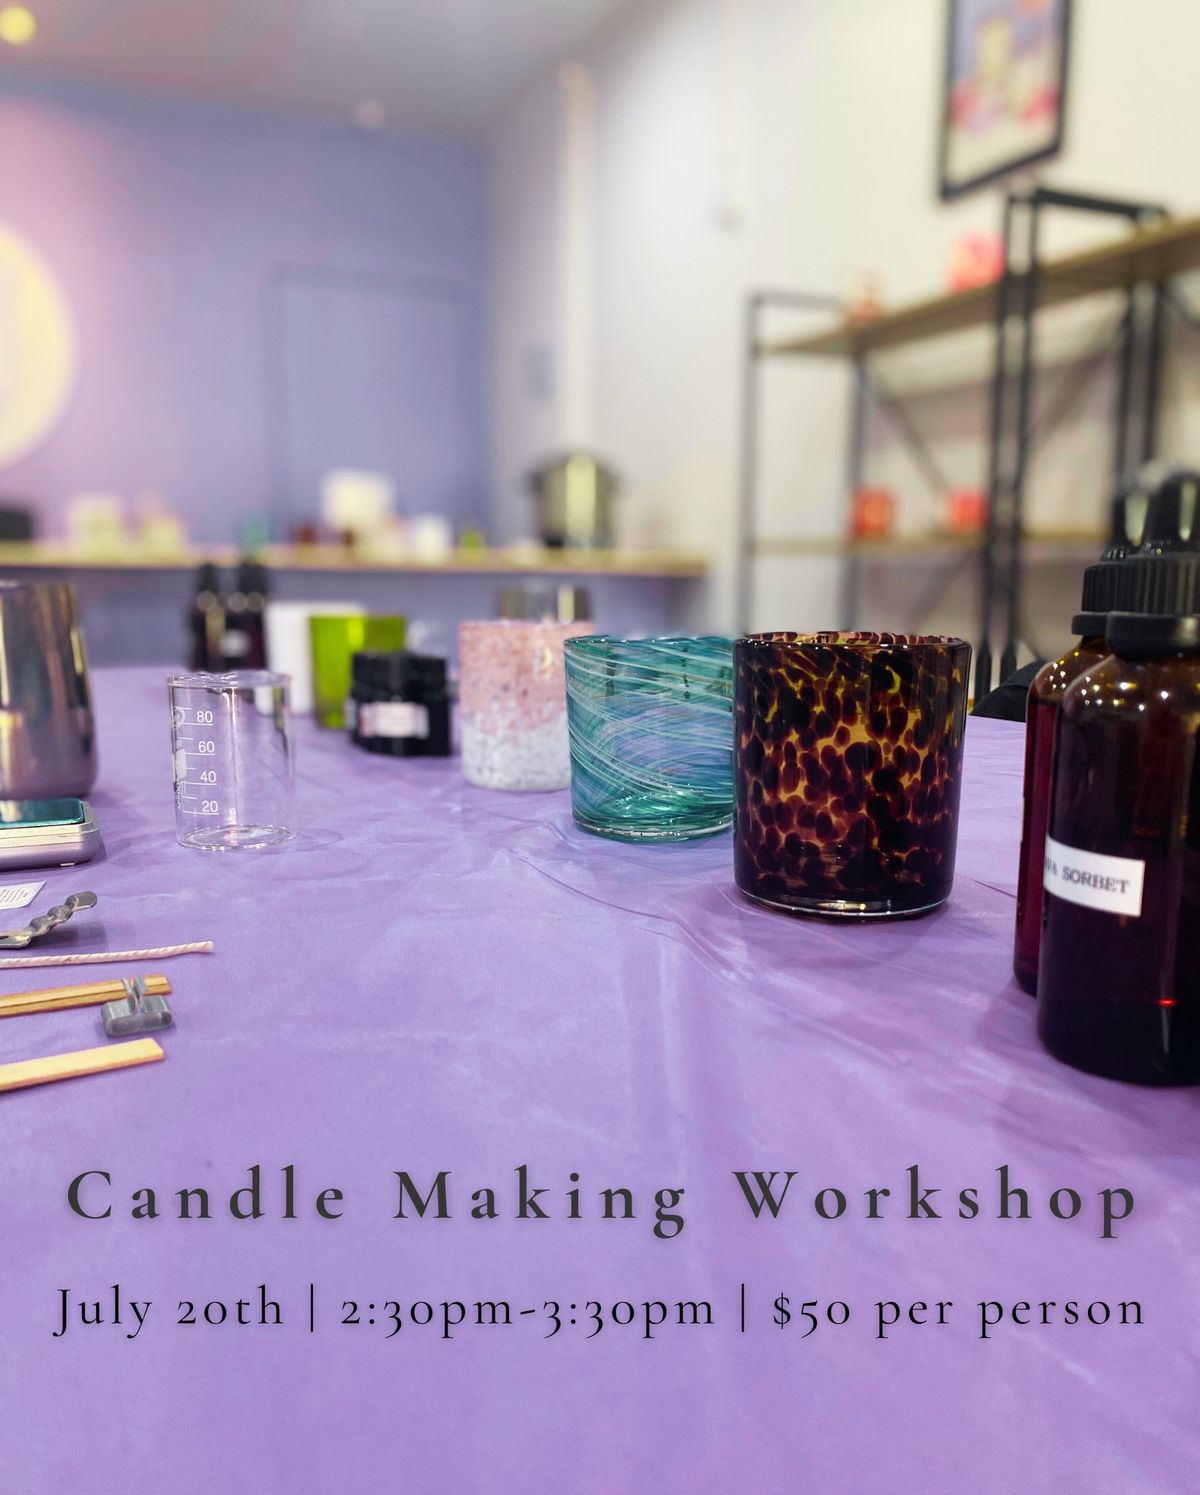 Candle Making Workshop | July 20th